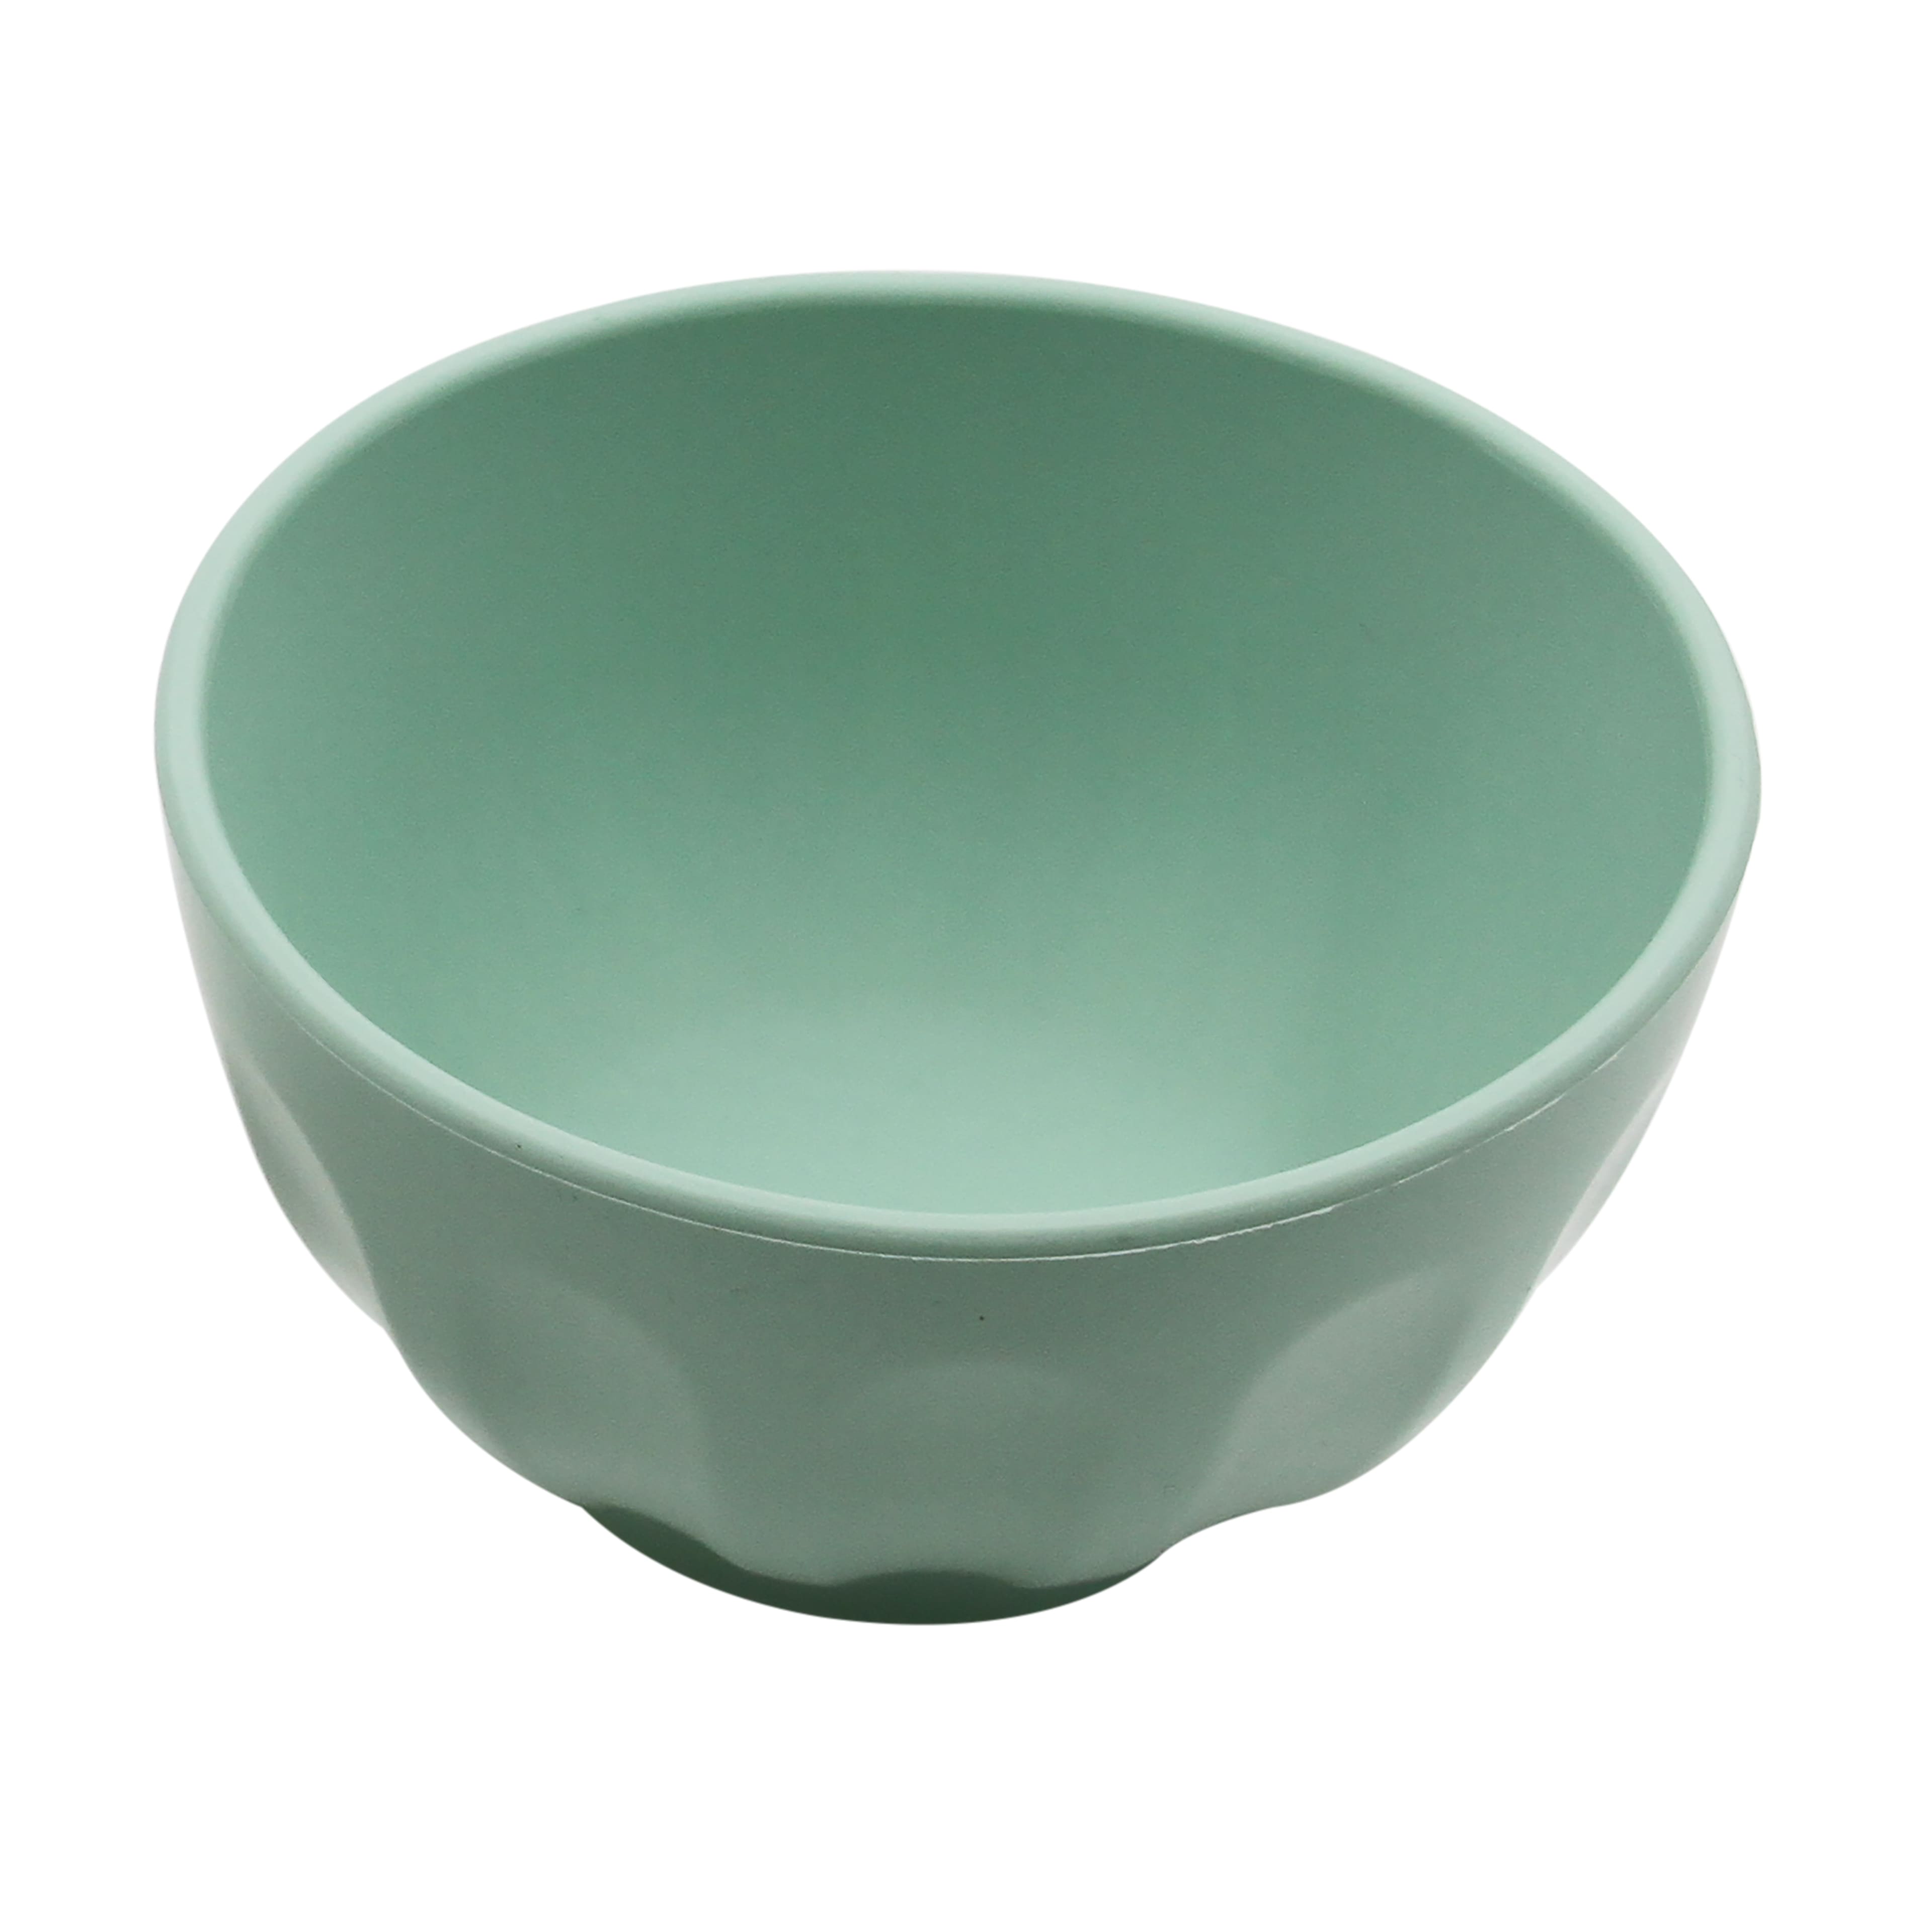 Large Silicone Prep Bowls by Celebrate It&#xAE;, 4ct.